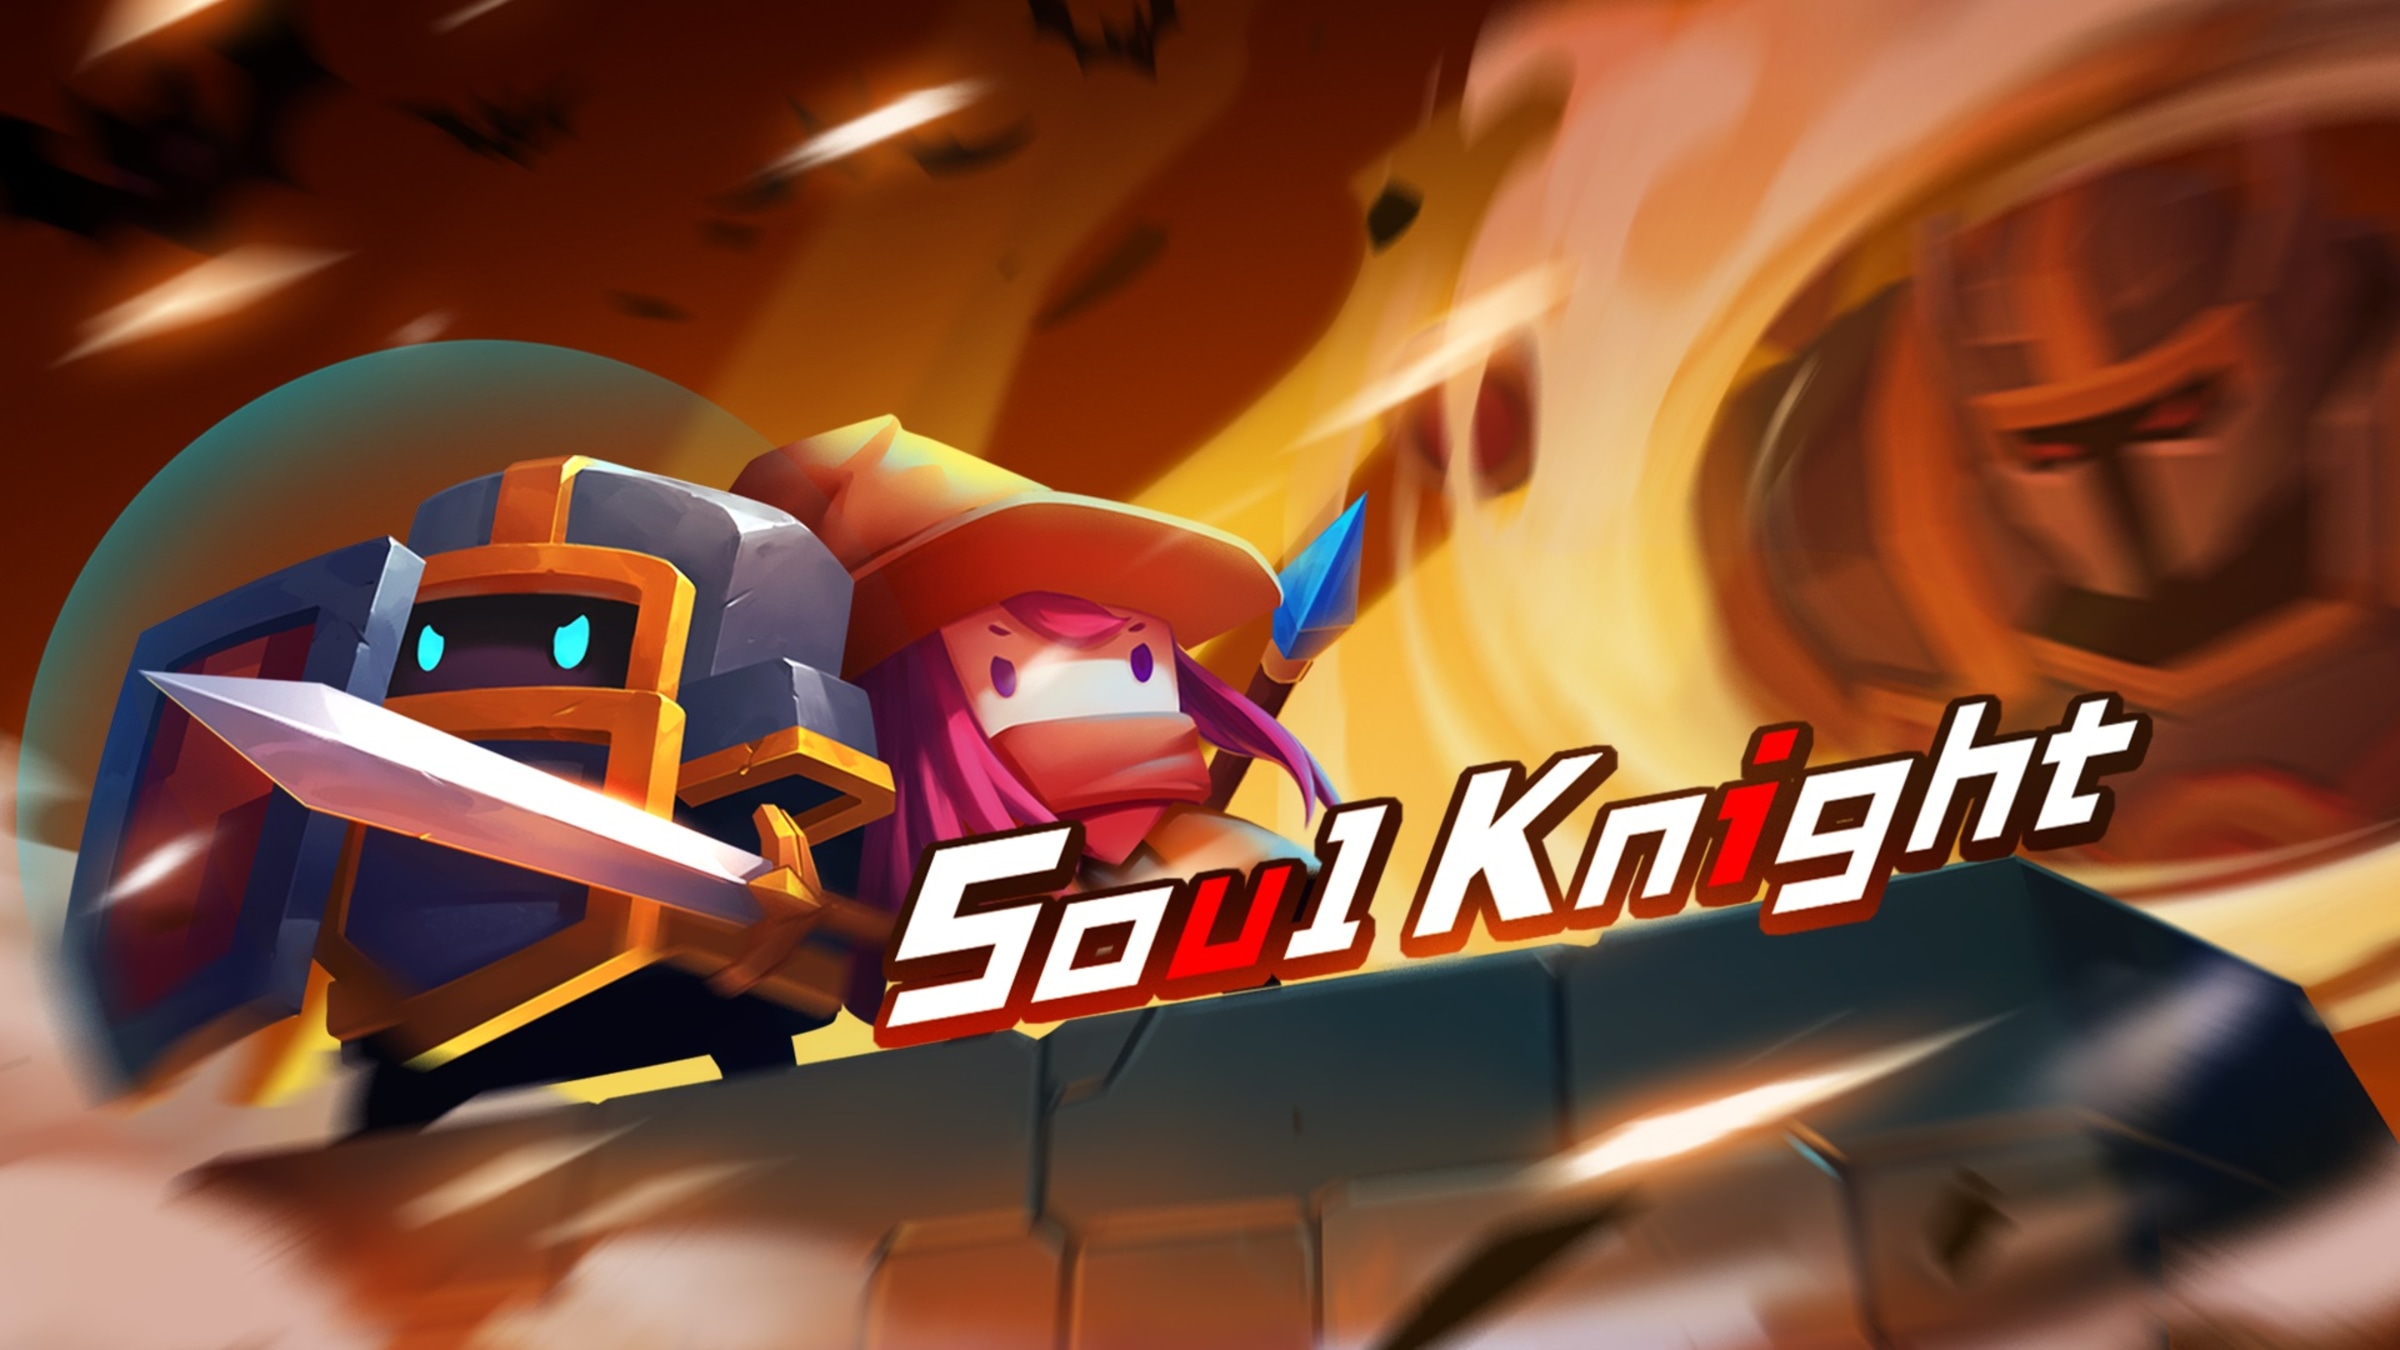 Soul Knight For Nintendo Switch - Nintendo Official Site